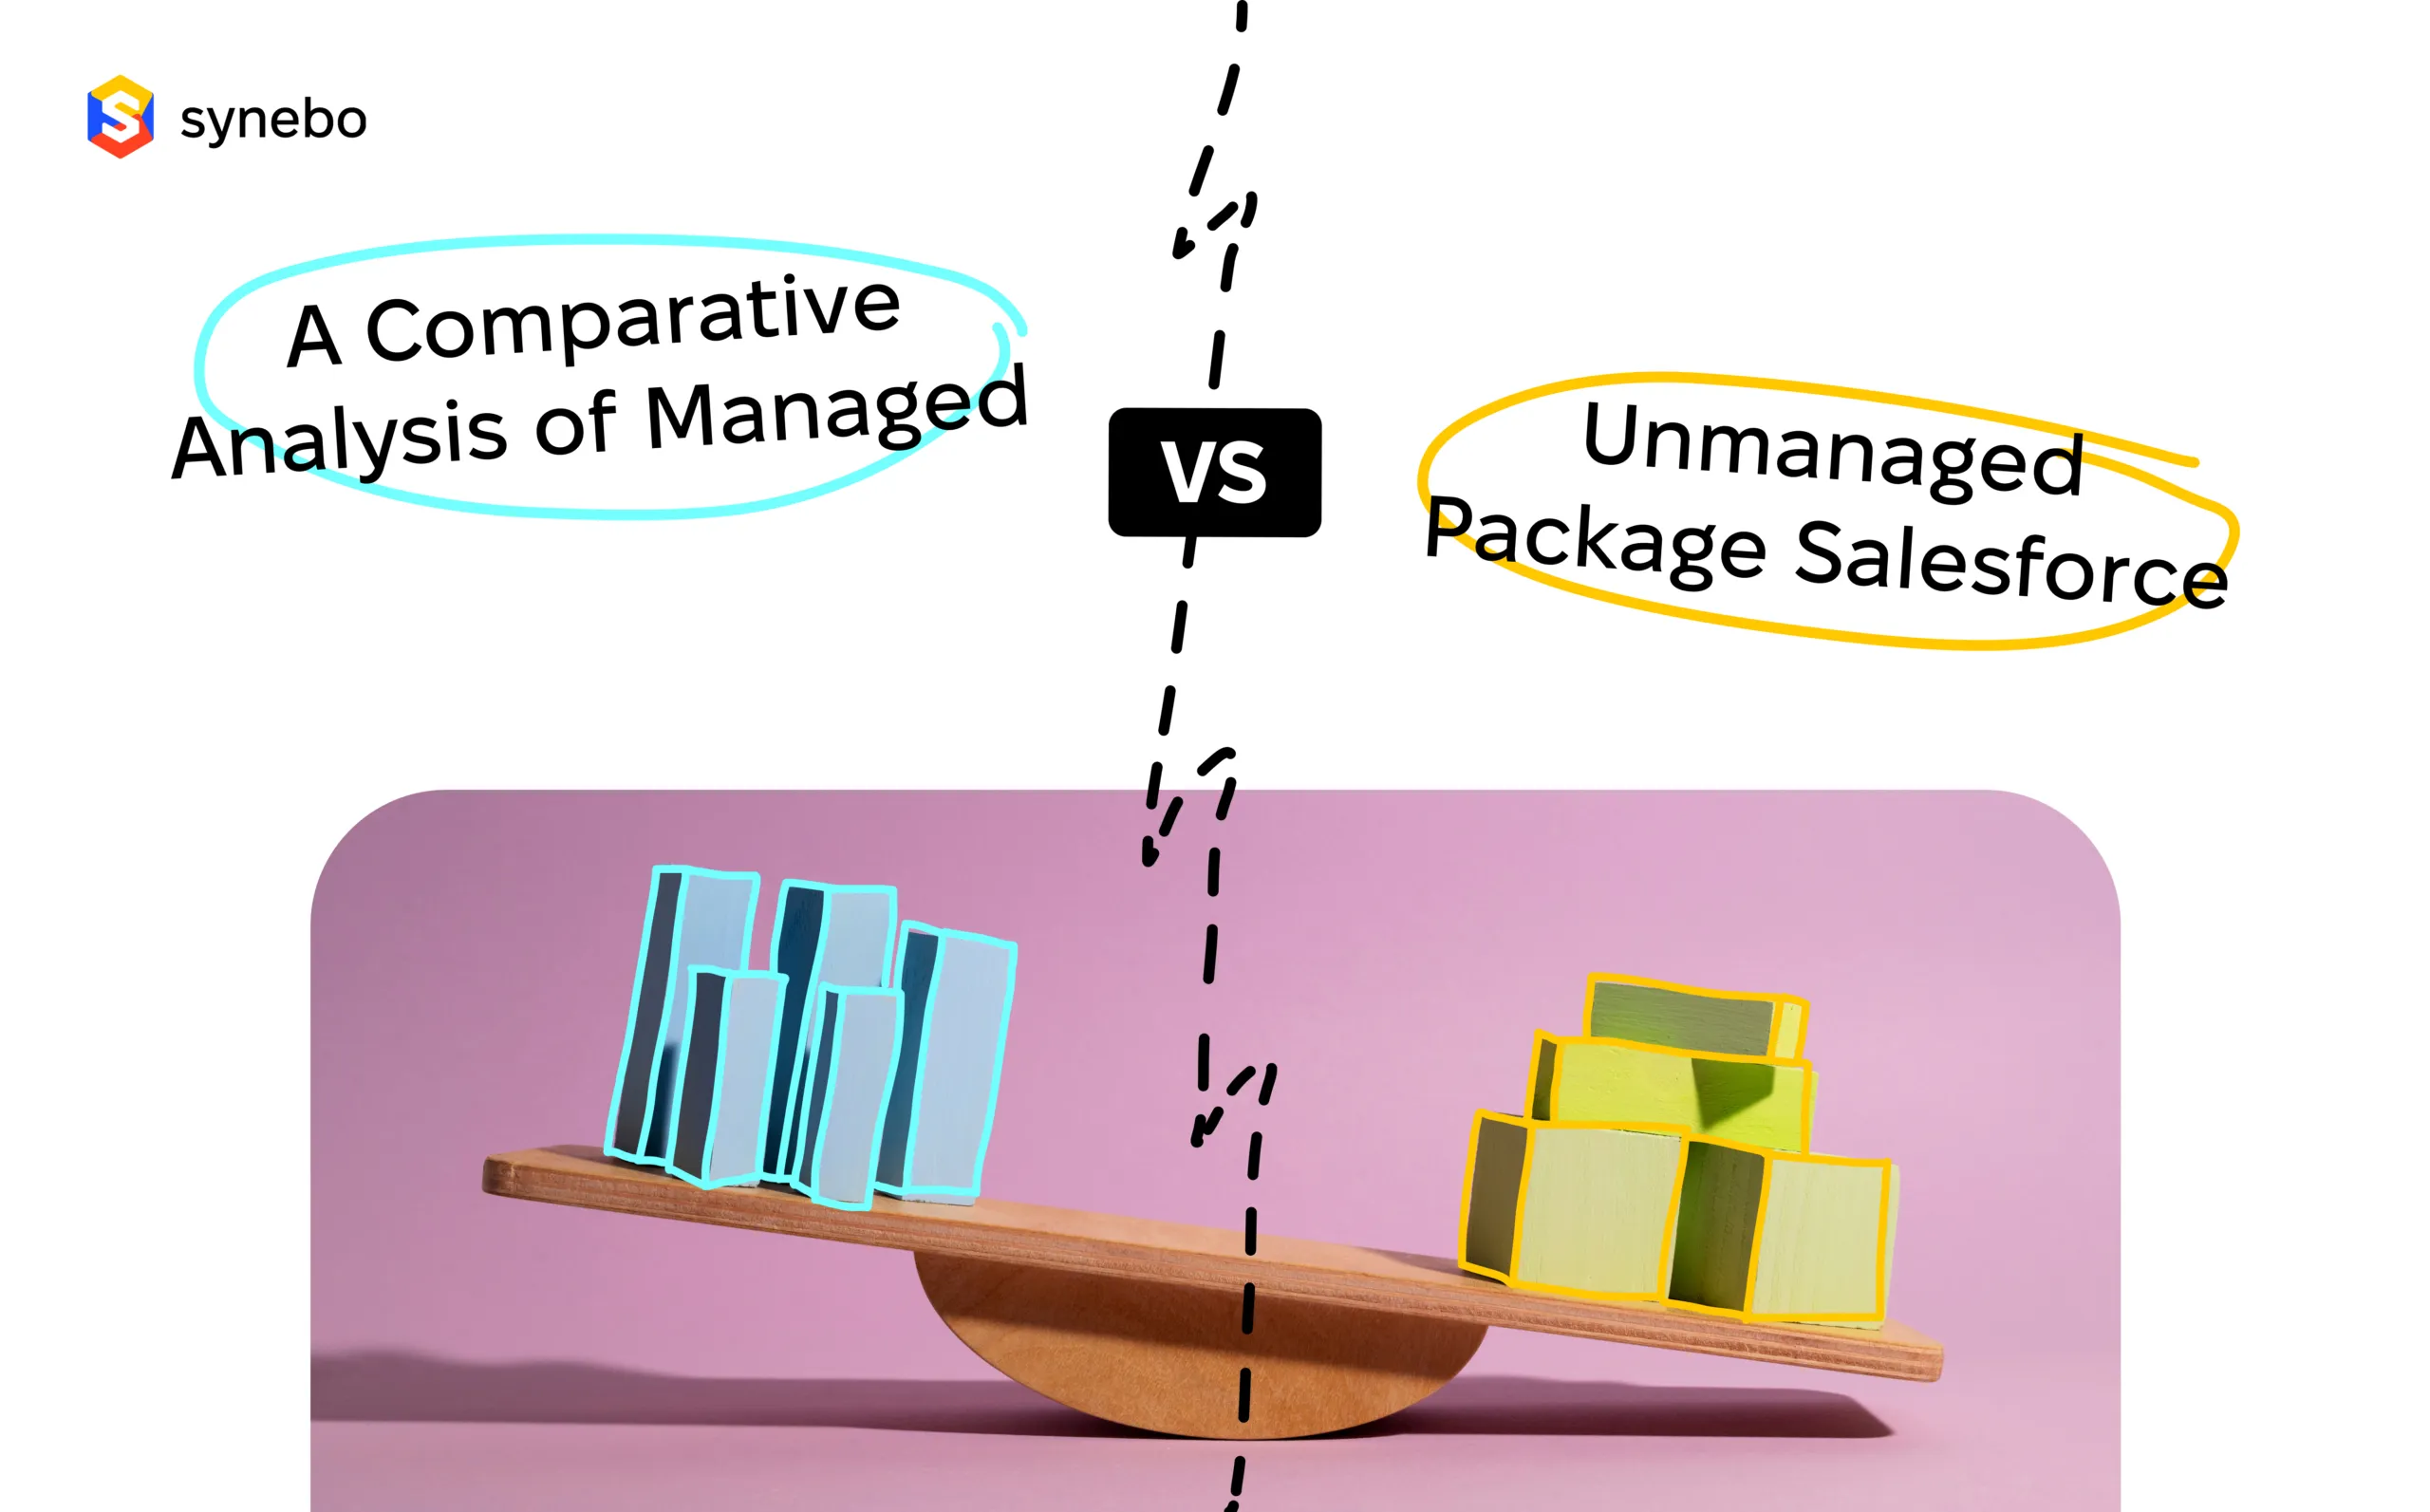 A comparative analysis of managed vs unmanaged package Salesforce